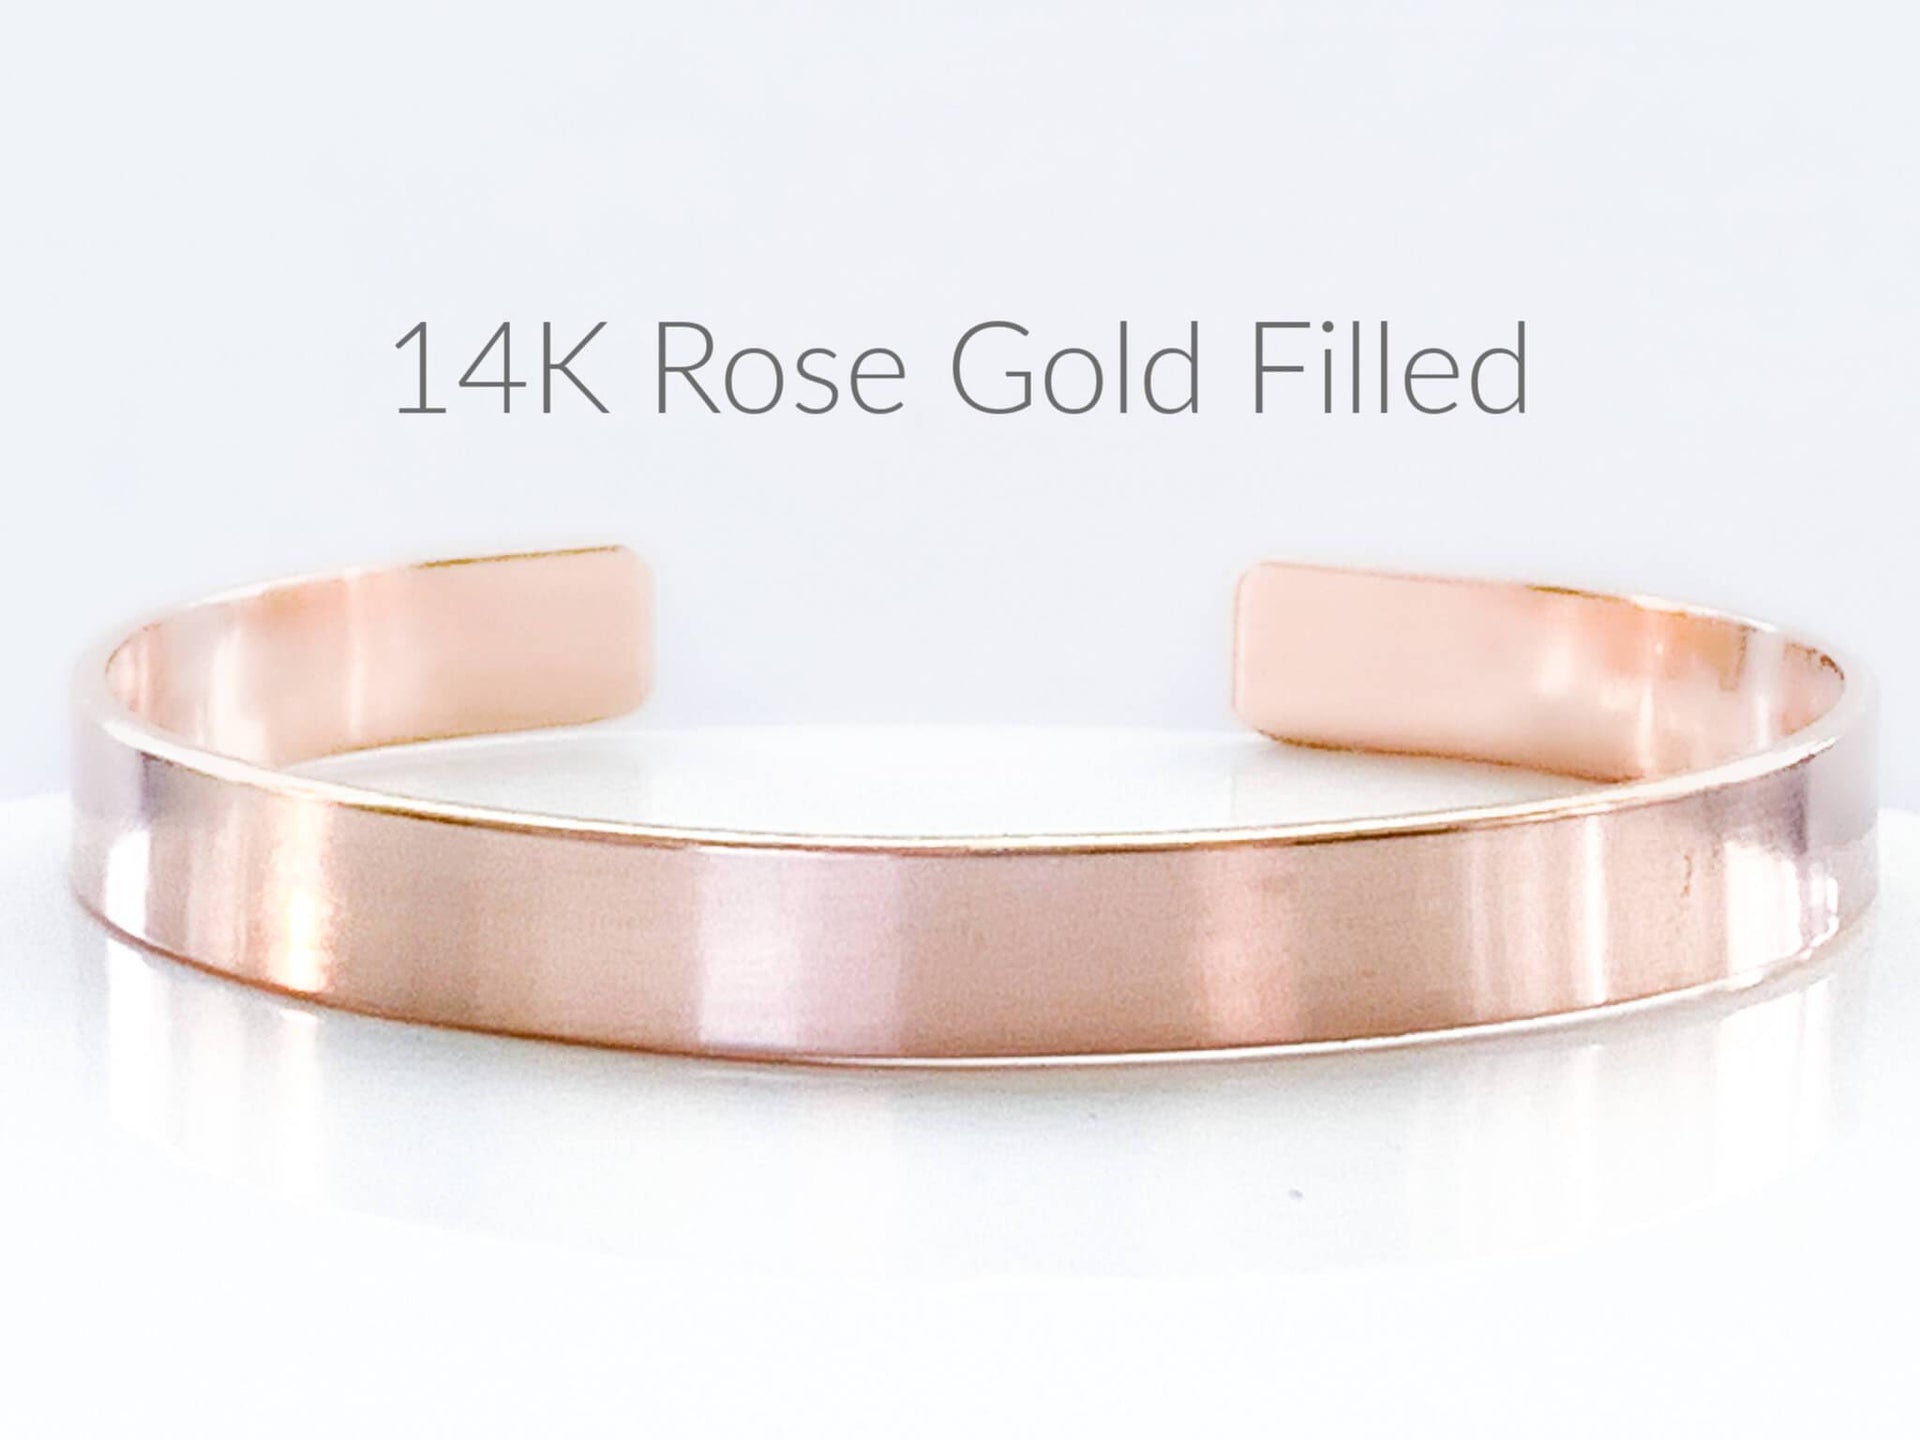 Everything Beautiful Bracelets Rose Gold-Filled This Too Shall Pass Hebrew Bracelet - Sterling Silver, Gold or Rose Gold